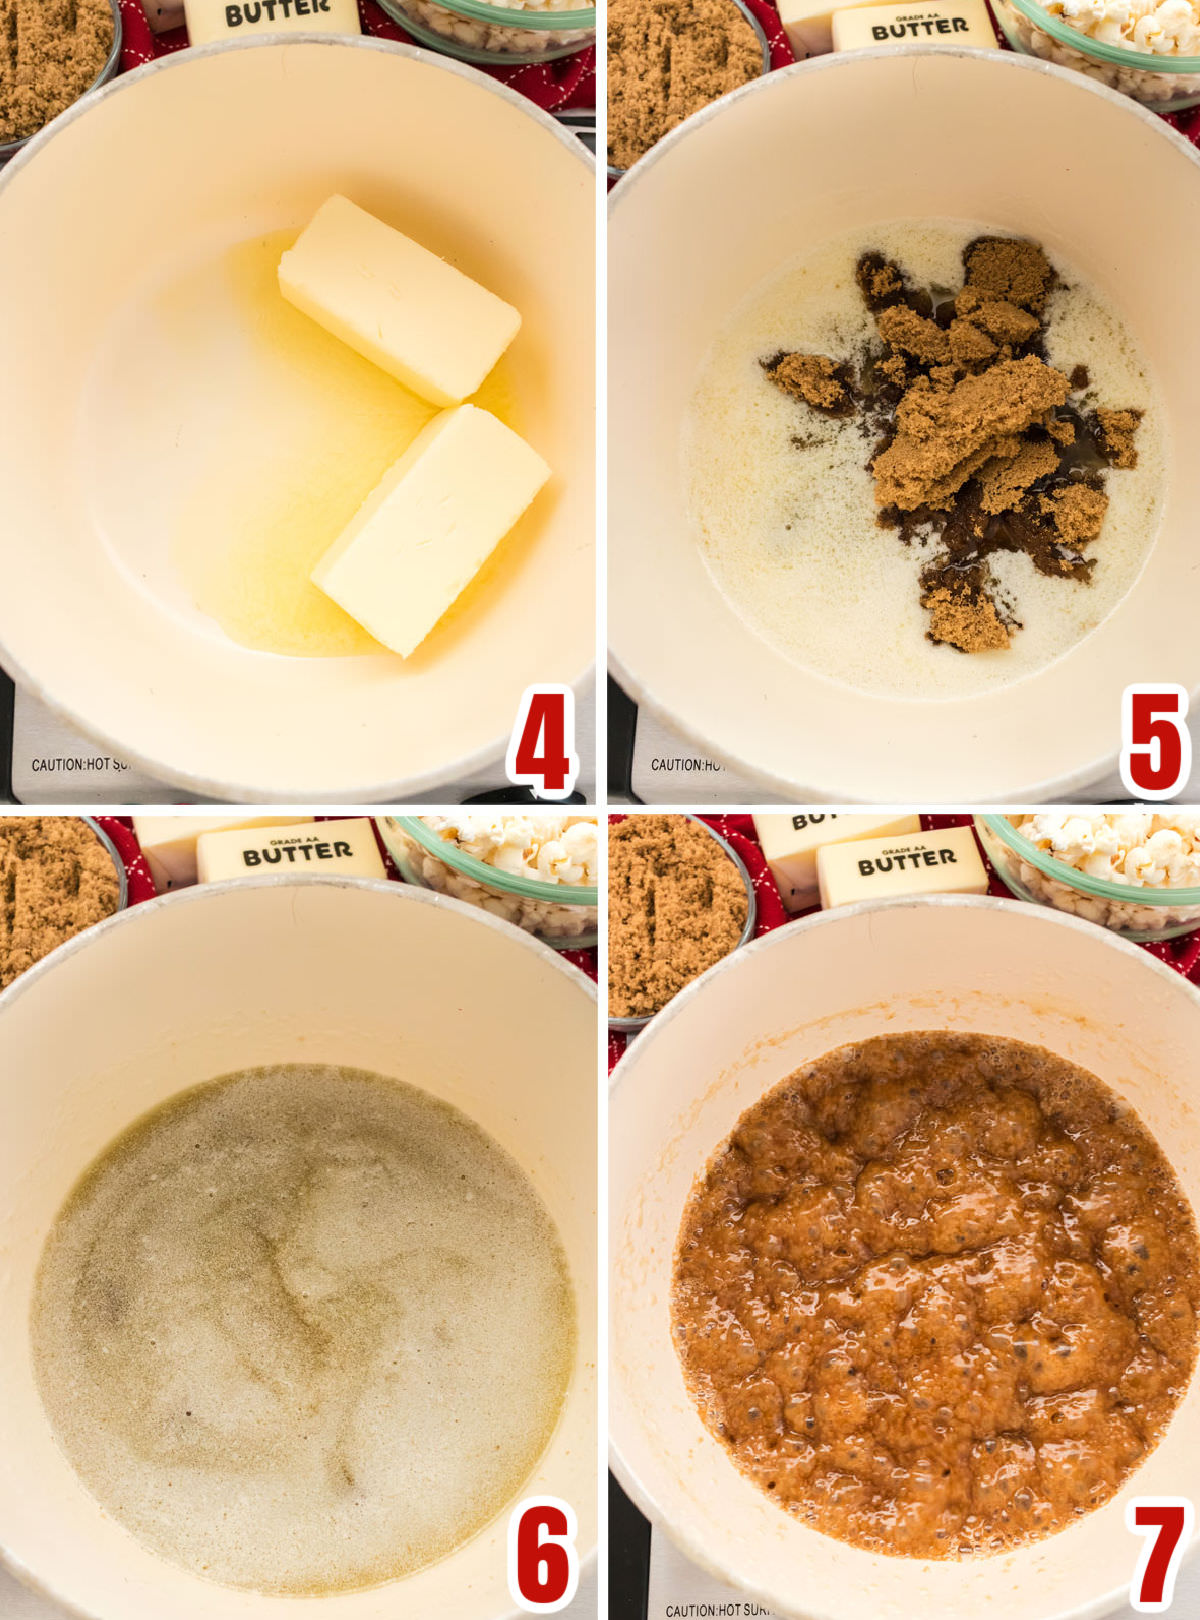 Collage image showing the steps for melting the butter and adding in the brown sugar to make the caramel mixture.